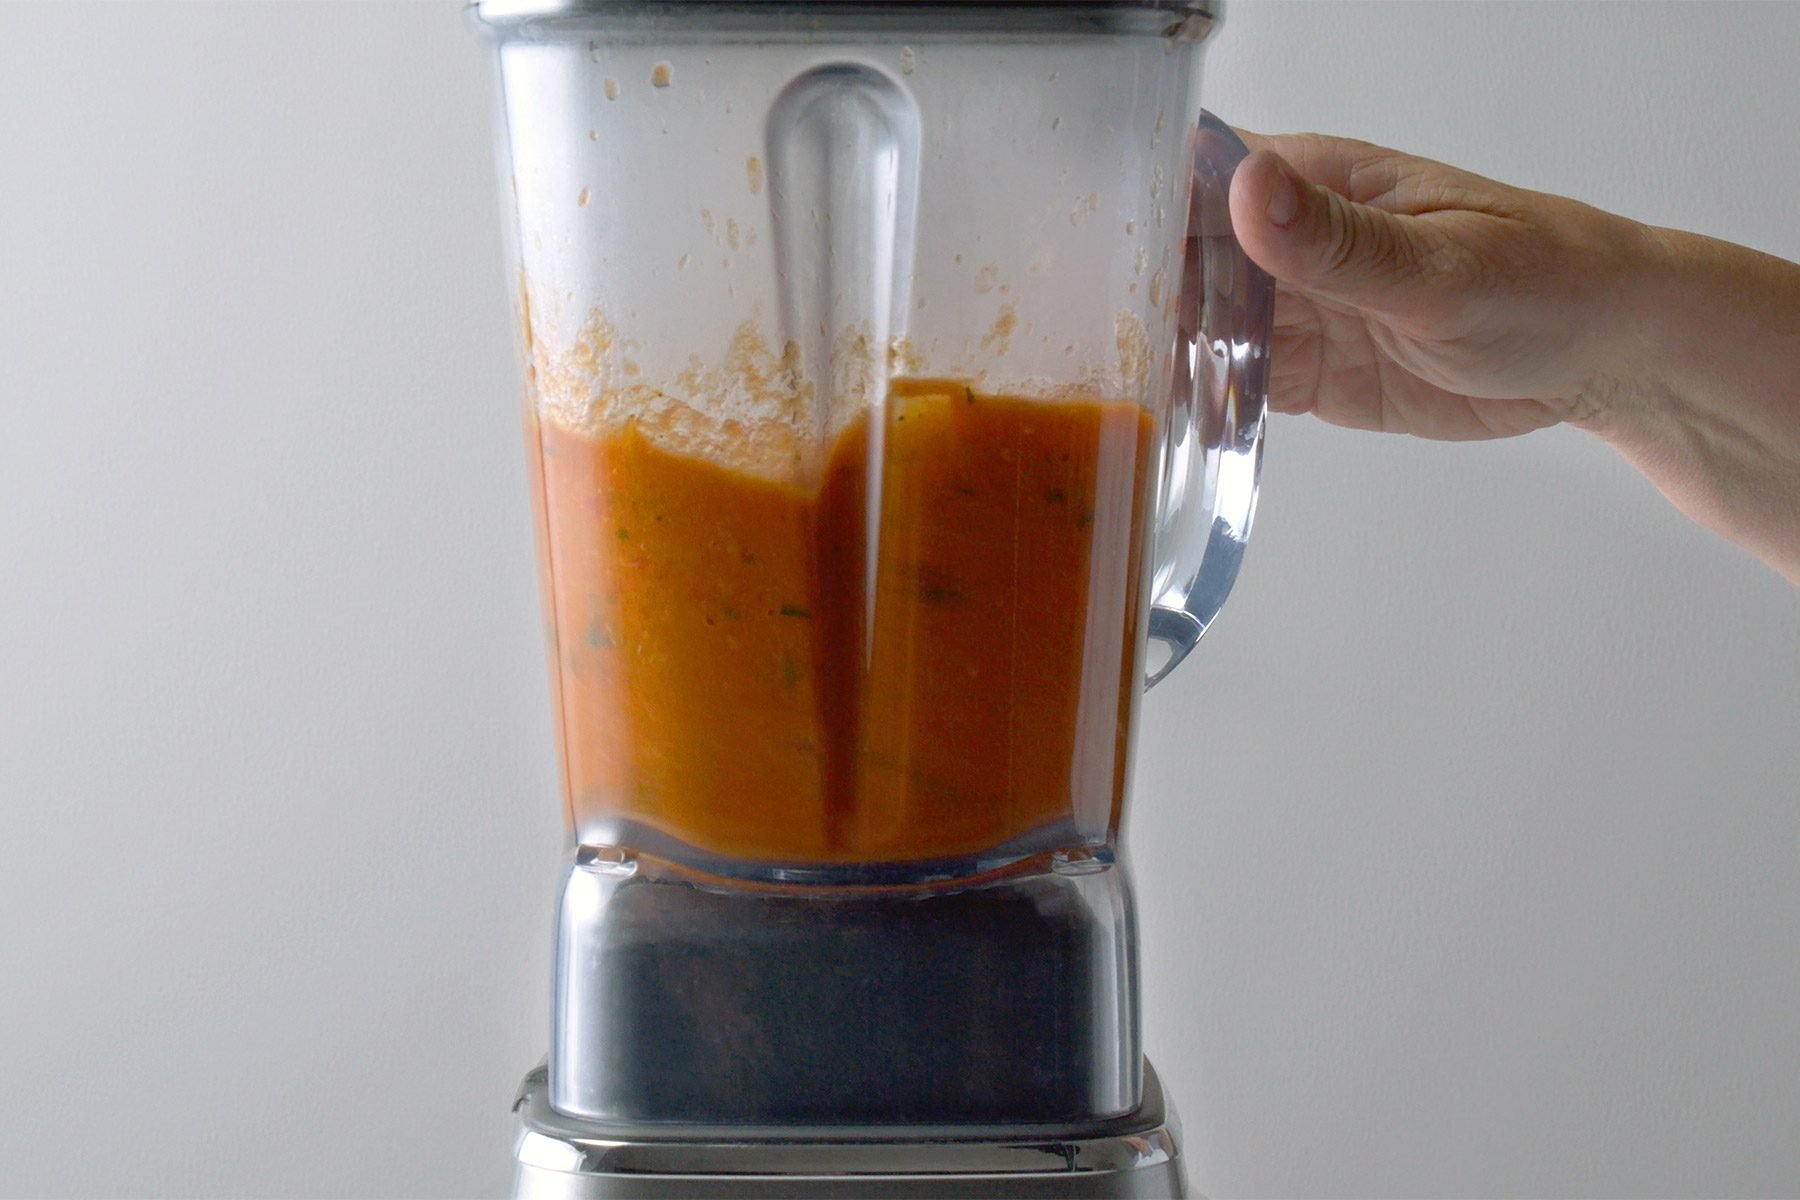 Transfer half of the soup mixture to a blender